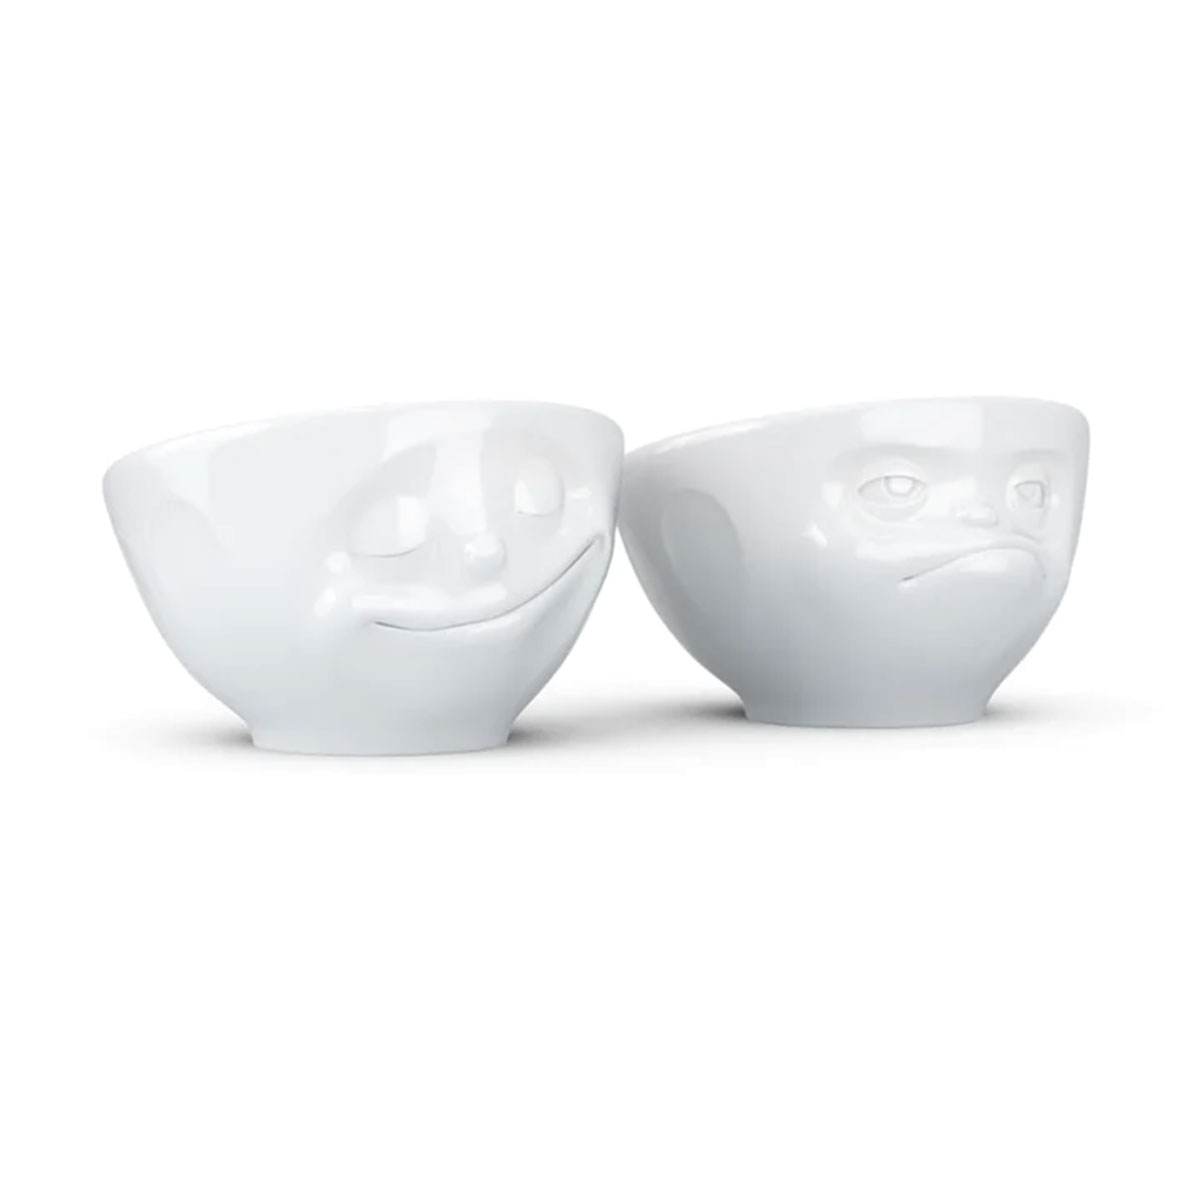 2 White Porcelain Egg Cups by Tassen - Happy and Angry